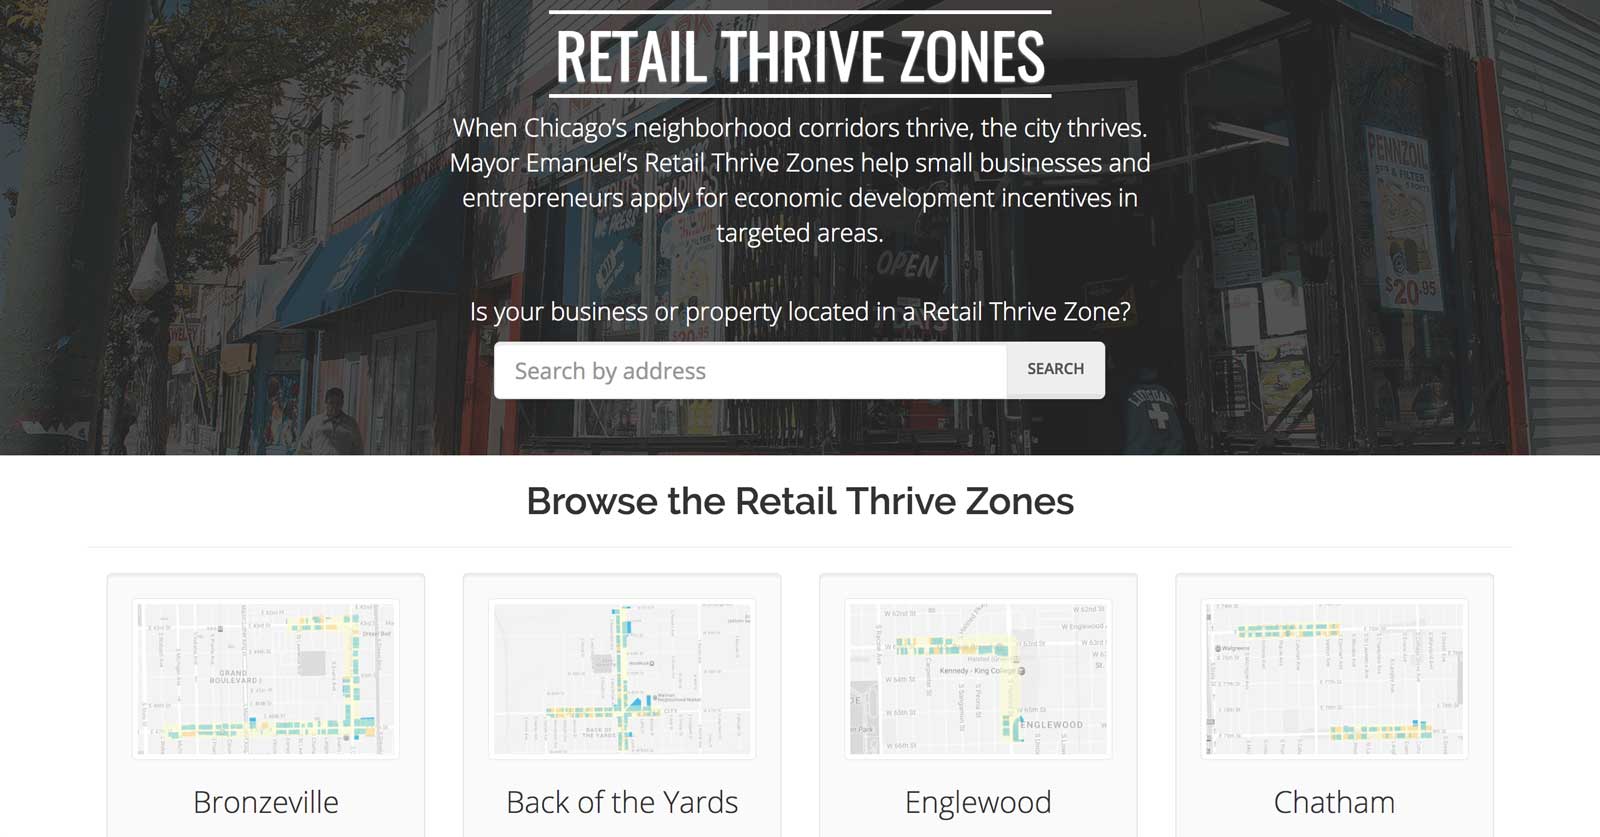 The Retail Thrive Zones home
page